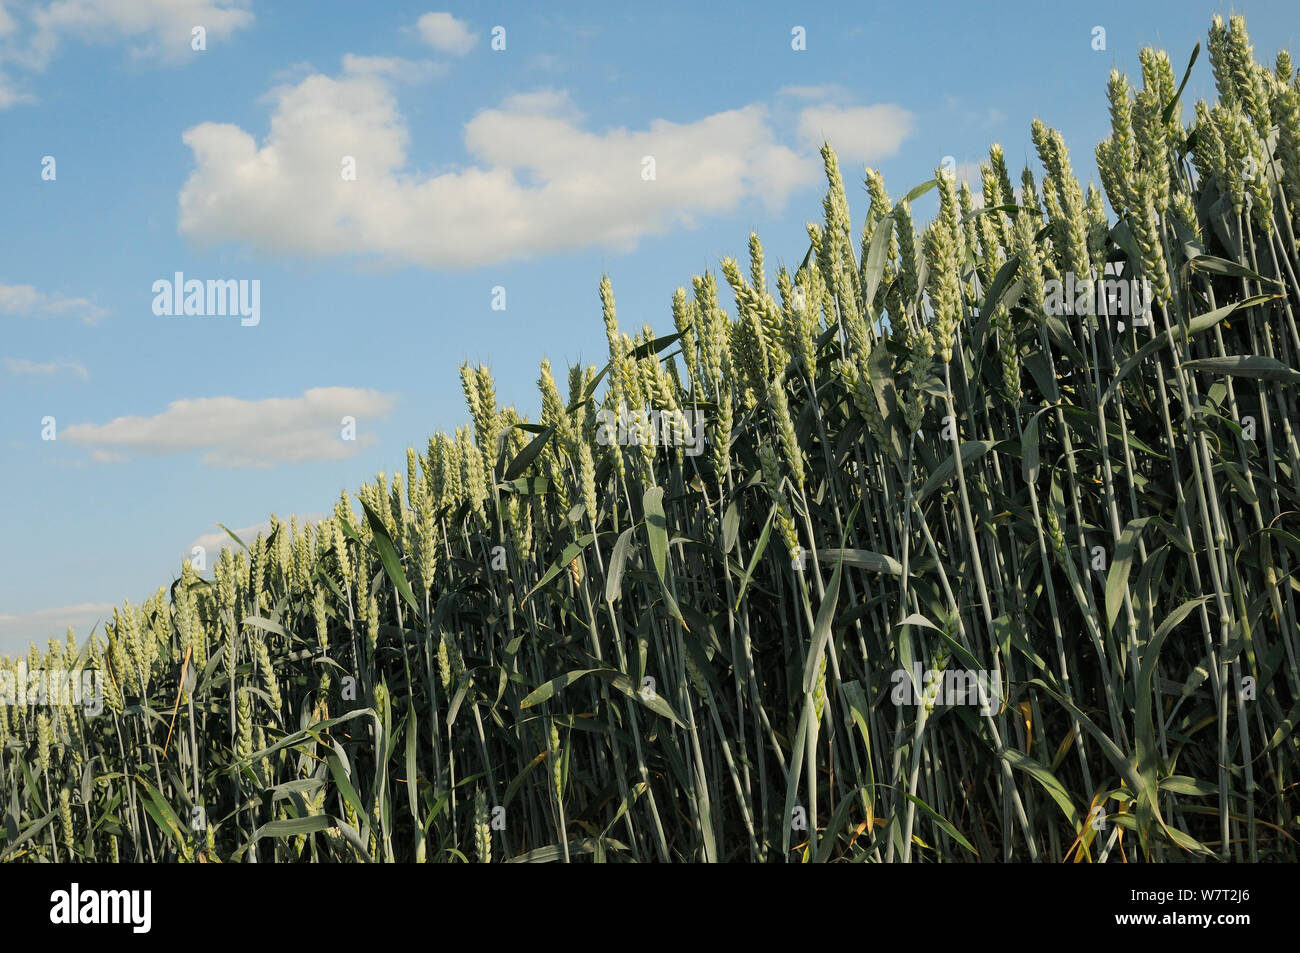 Low angle view of ripening Wheat crop (Tricticum aestivum), Marlborough Downs, Wiltshire, UK, July. Stock Photo